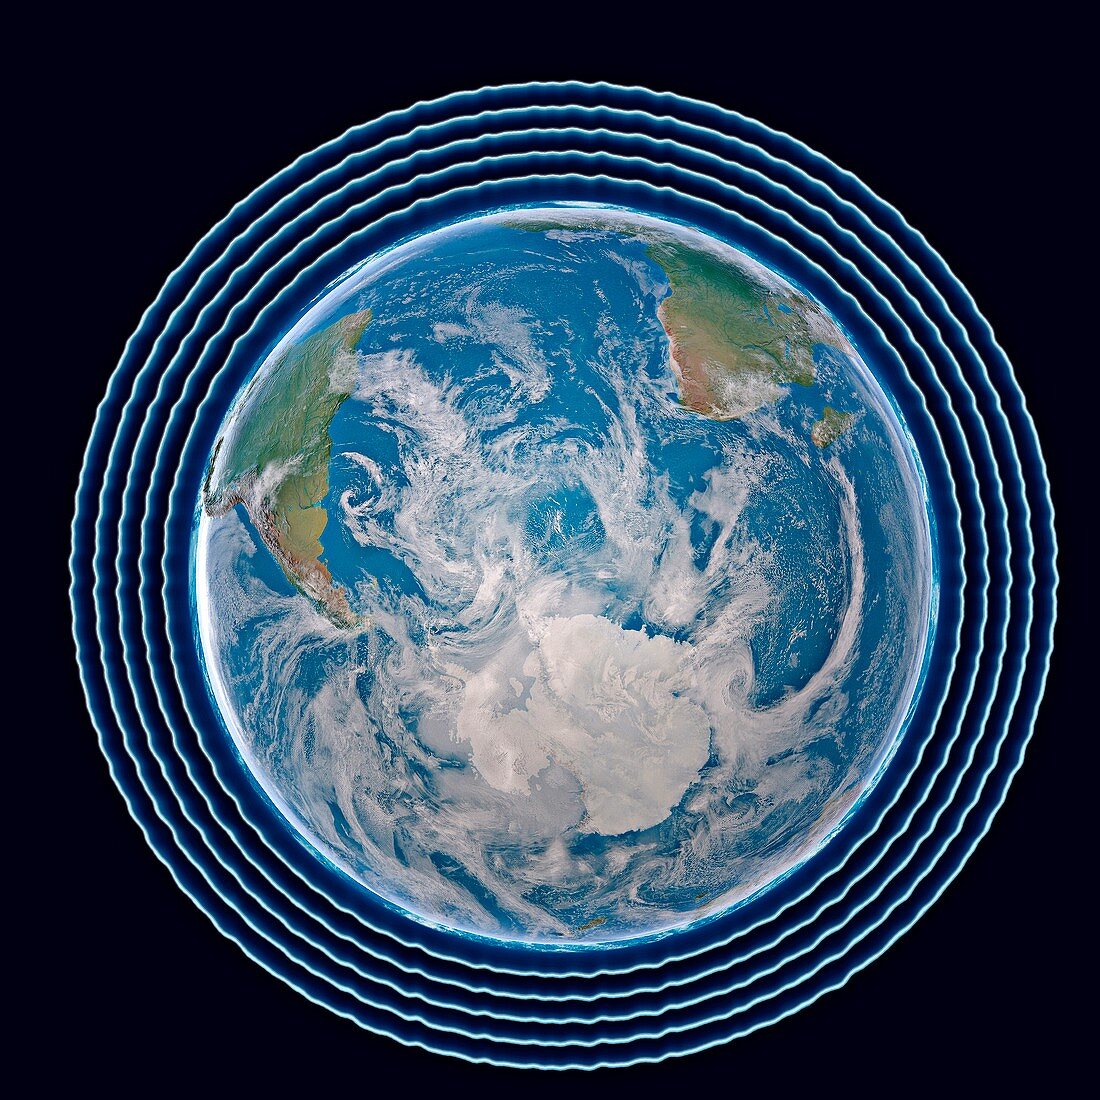 Earth's magnetic field, illustration